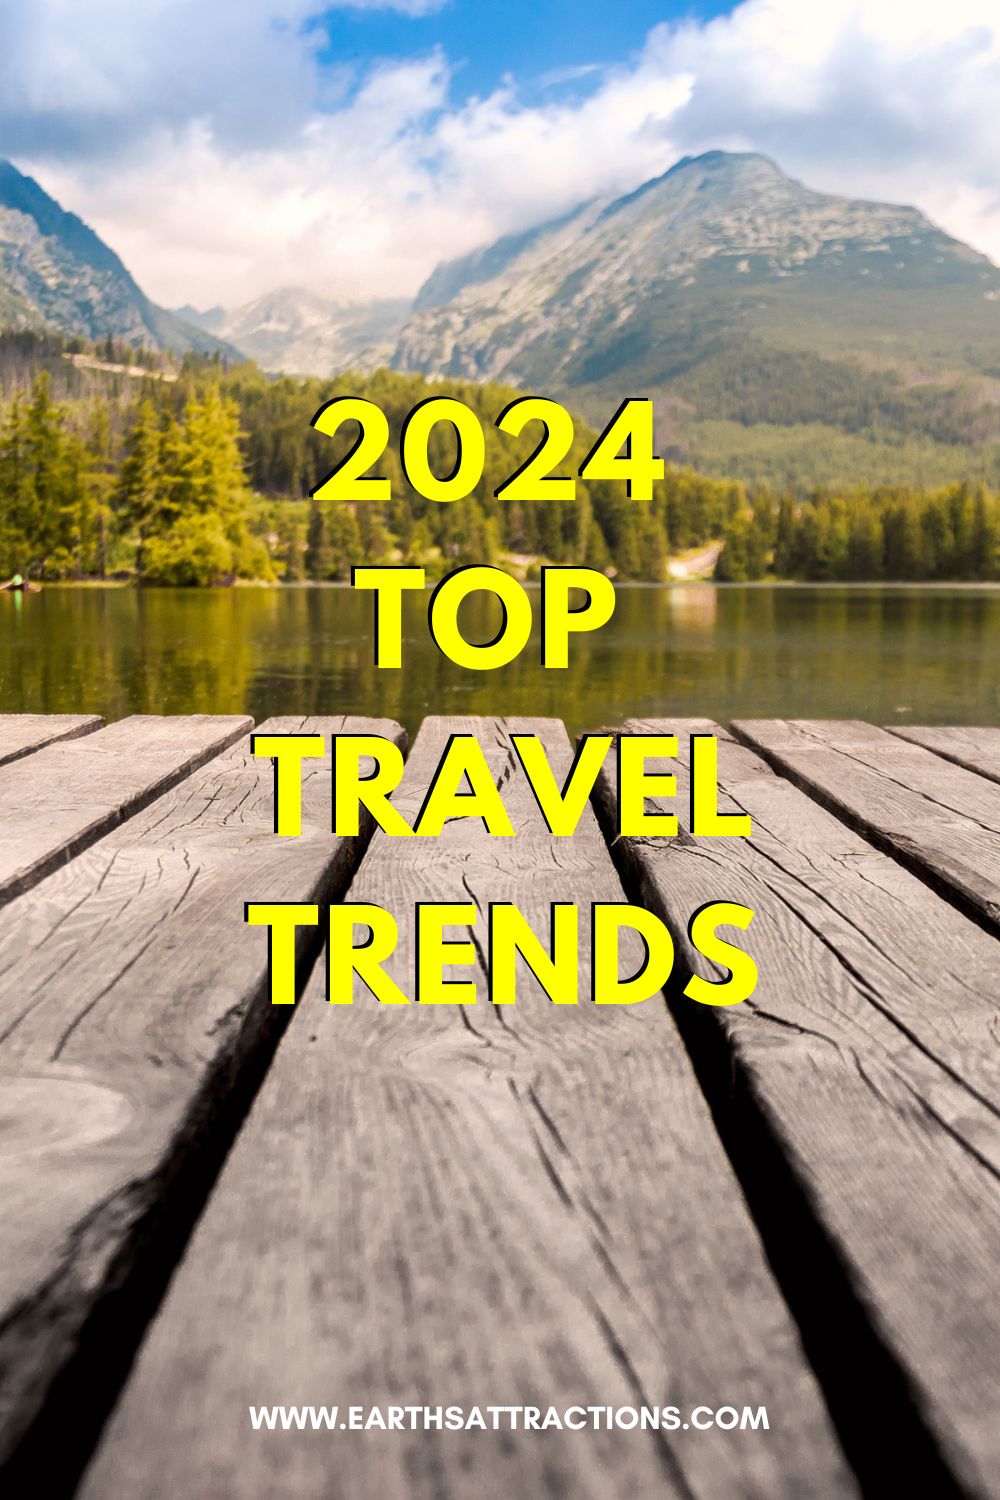 2024 Travel trends - discover the top travel trends for 2024 #traveltrends #2024 #traveltrends2024 #2024traveltrends